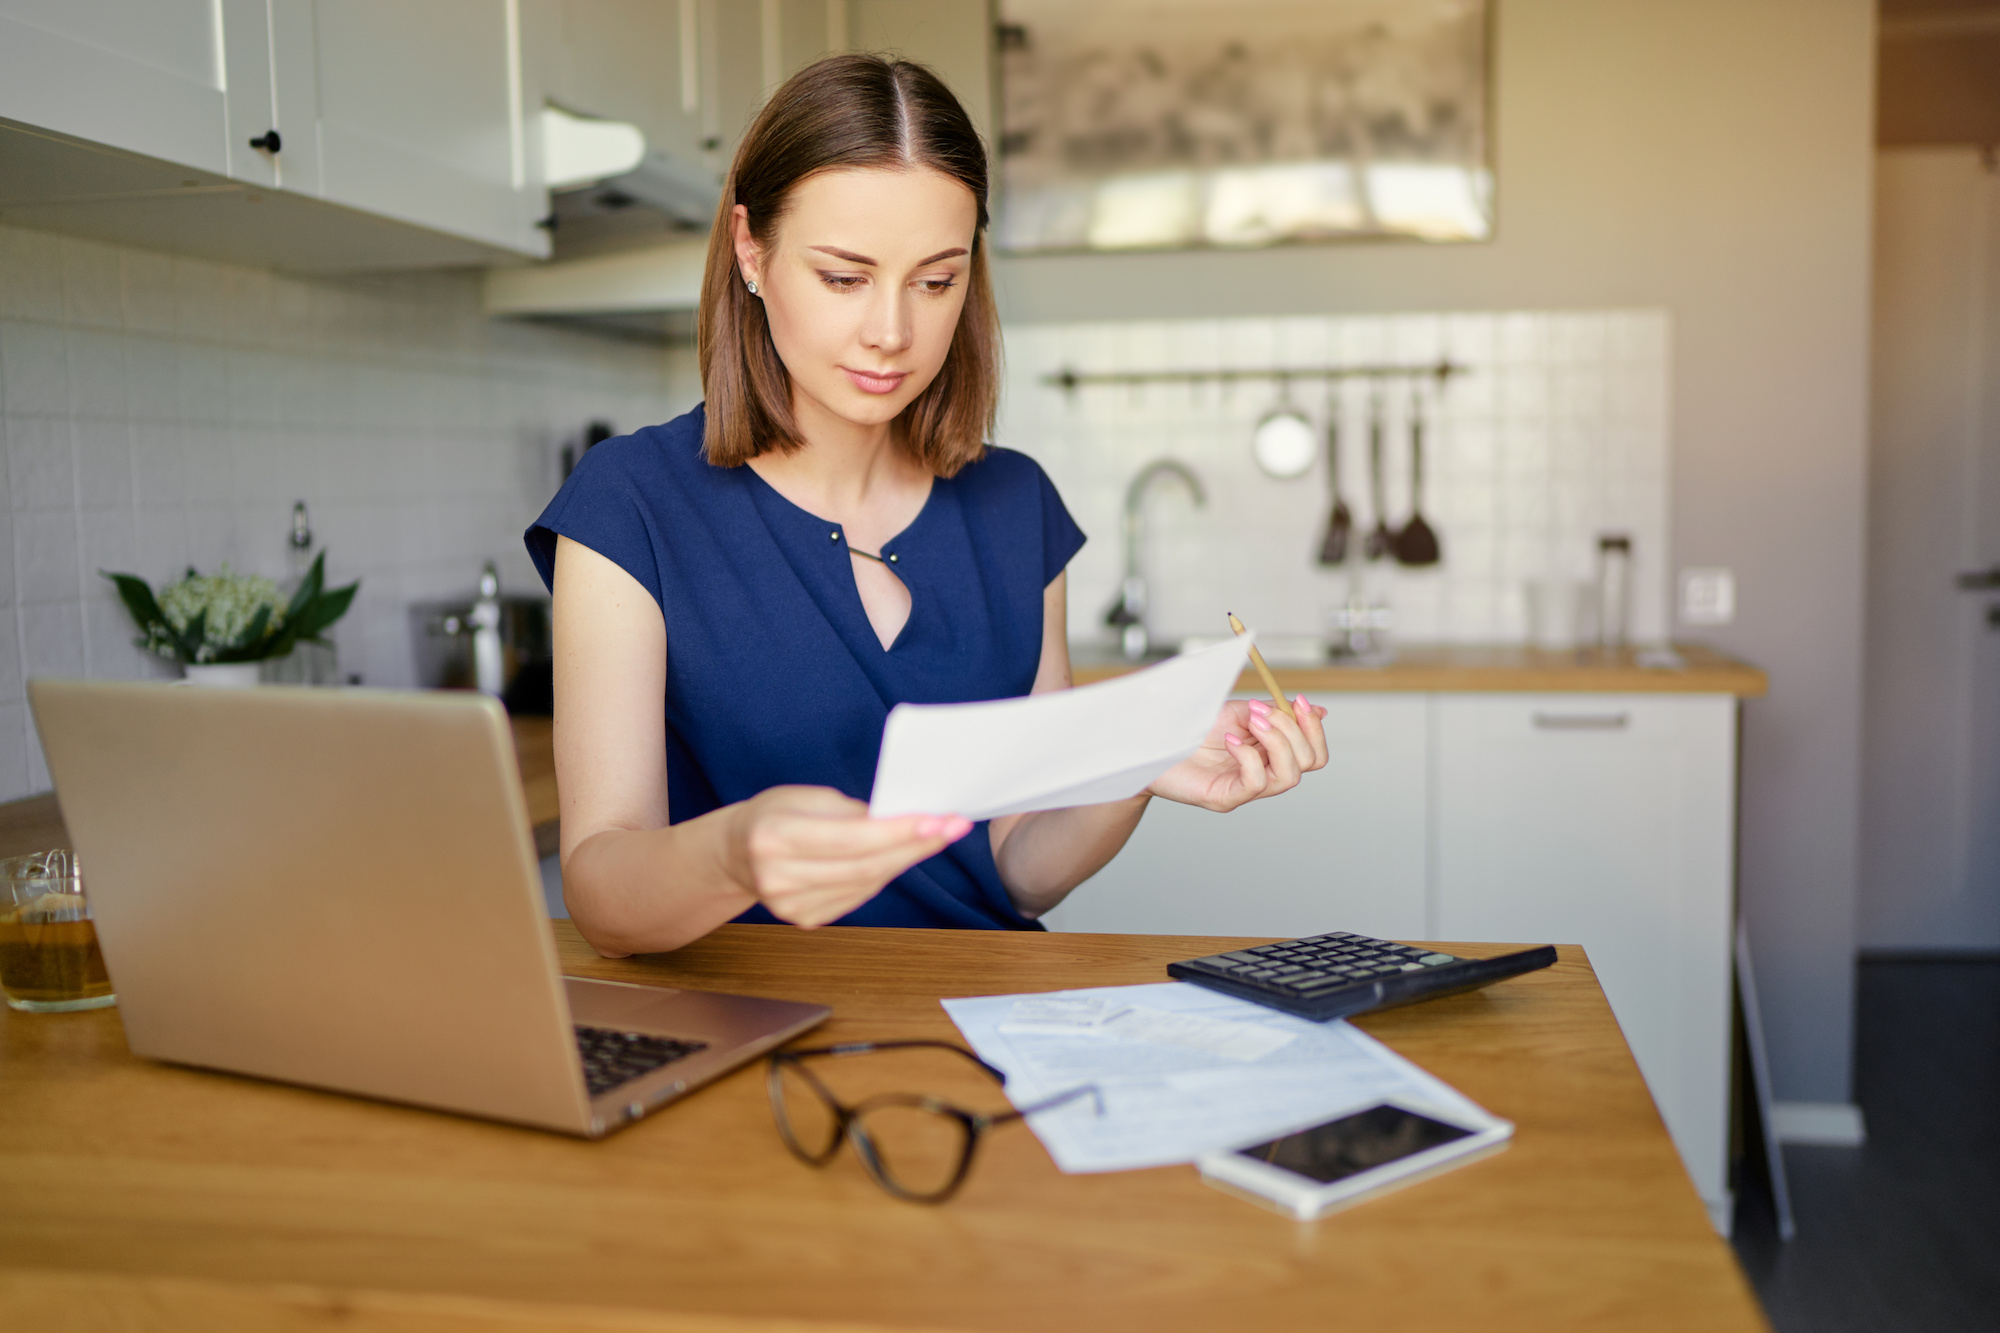 A woman looks over bills in her kitchen in front of a computer.